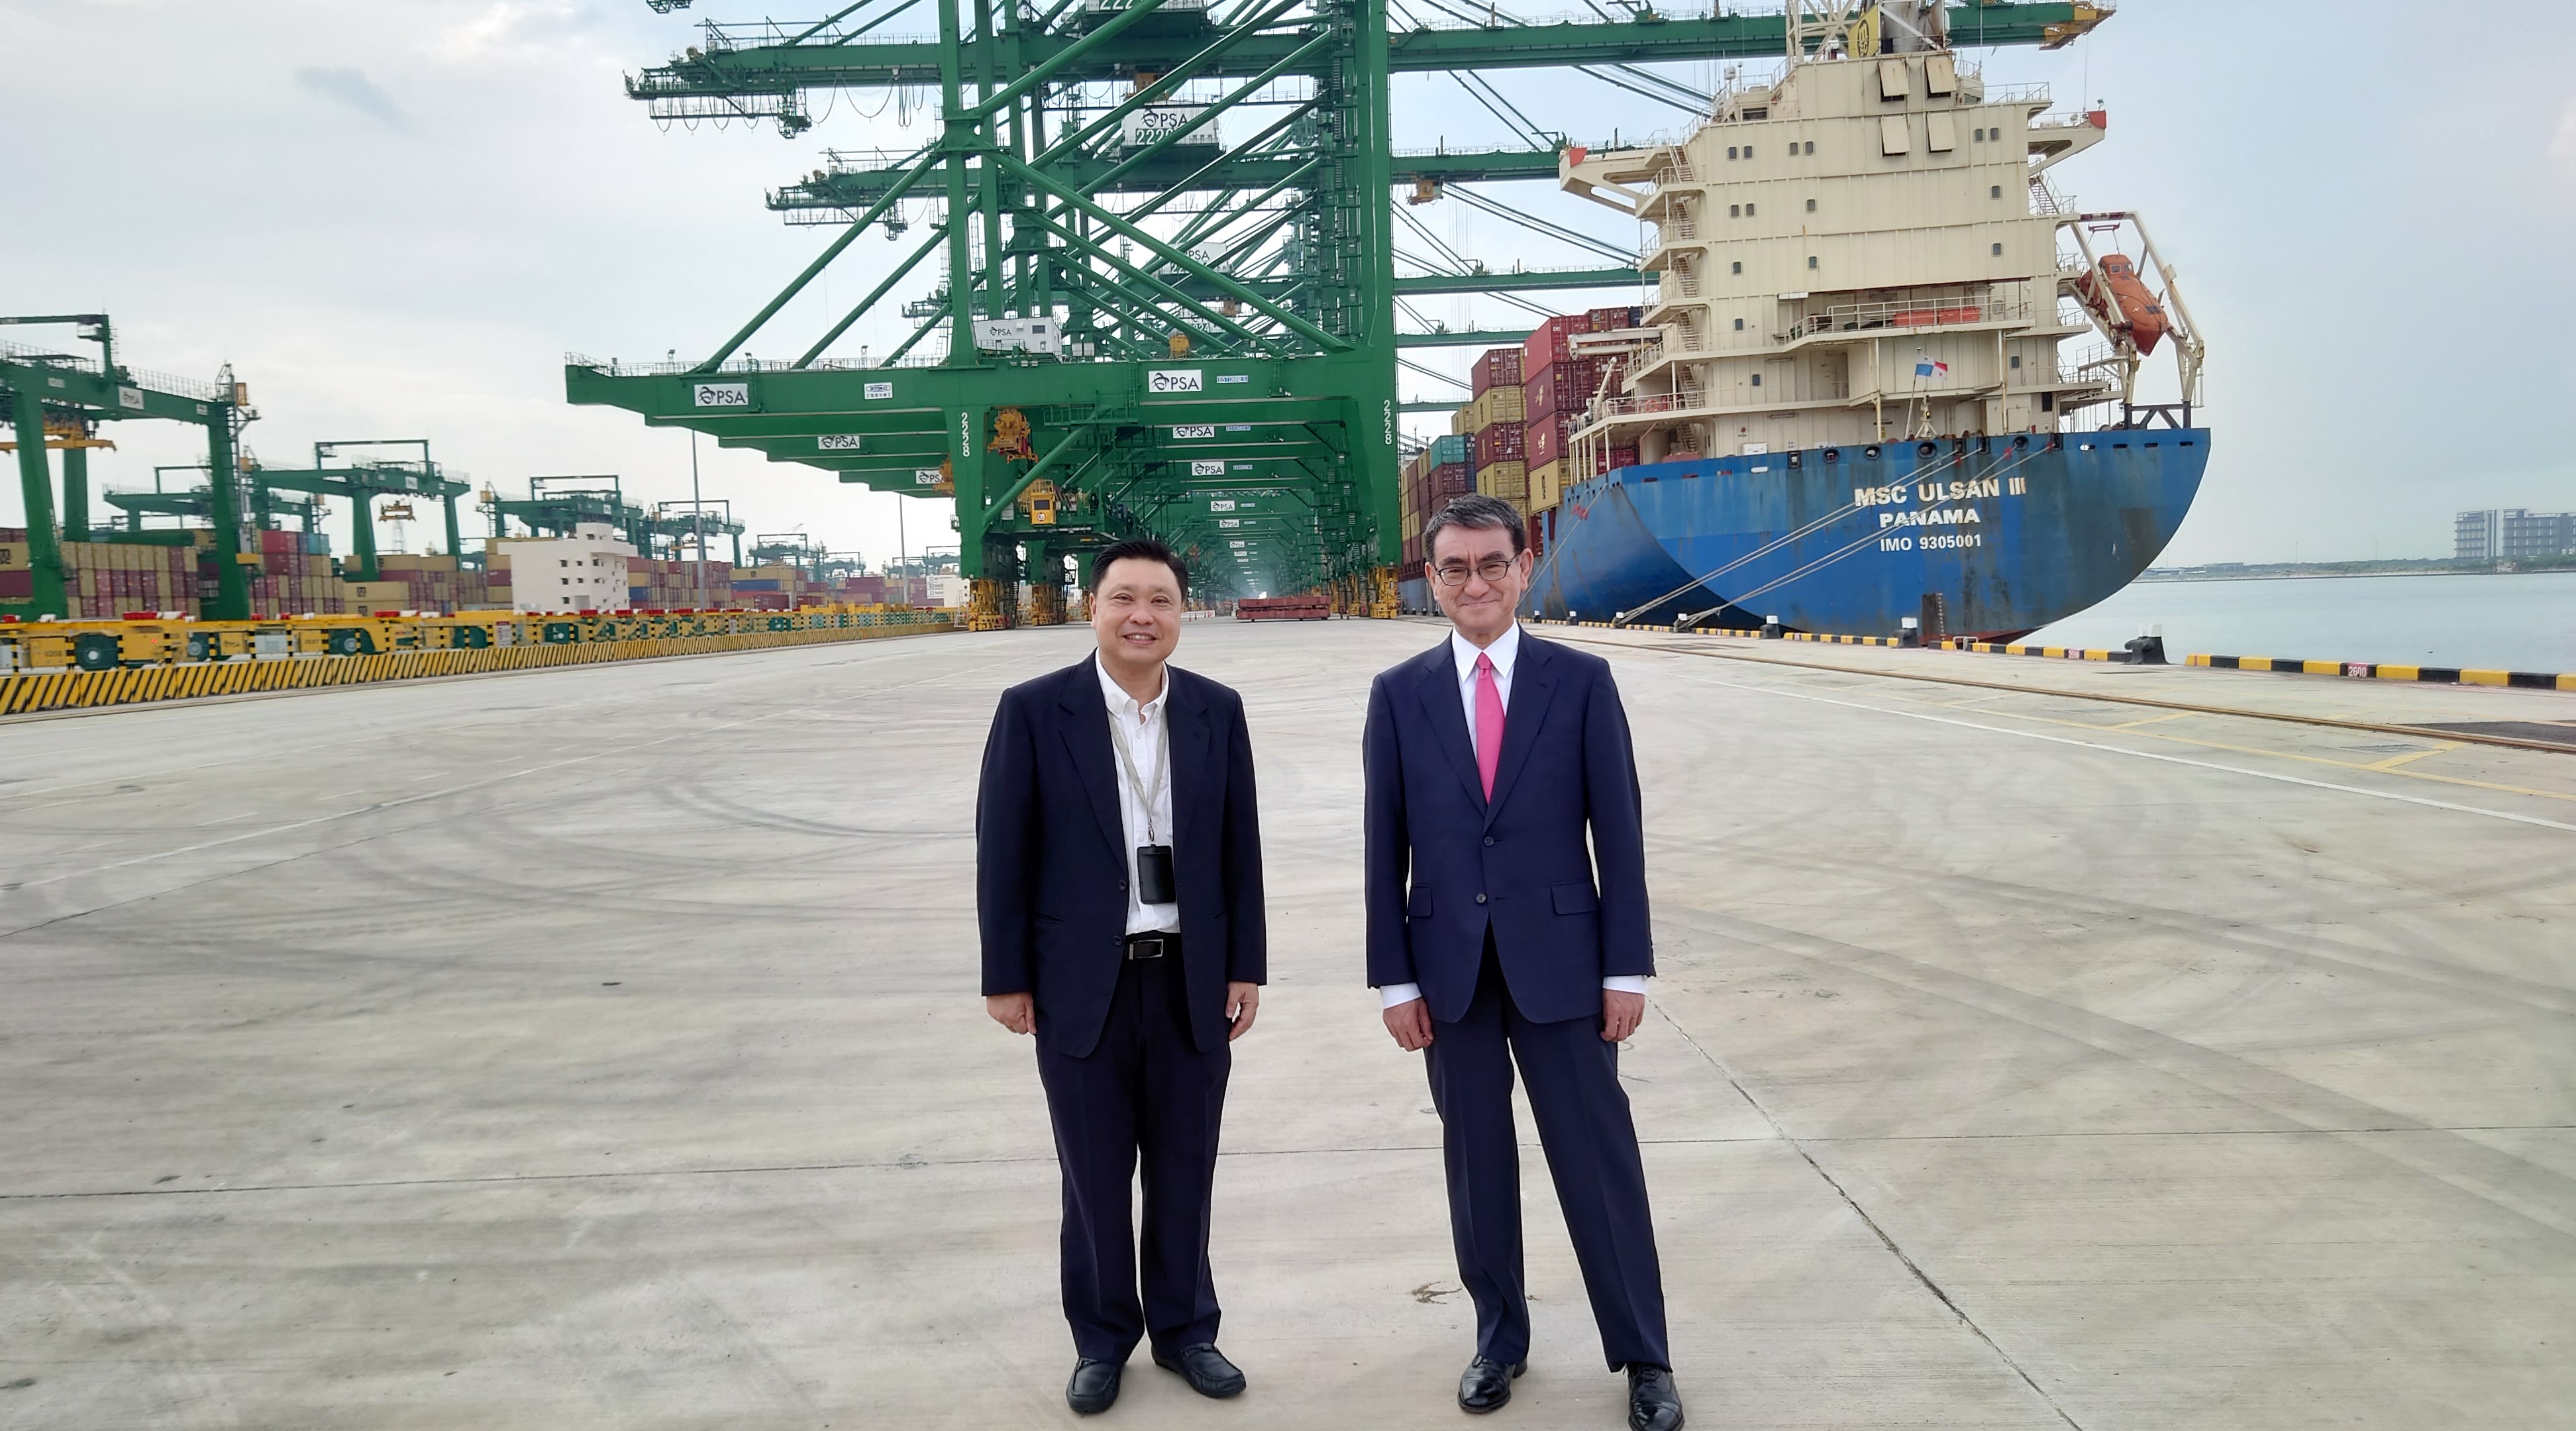 Visited Tuas Port, set to become the world’s largest fully automated terminal in 2040.